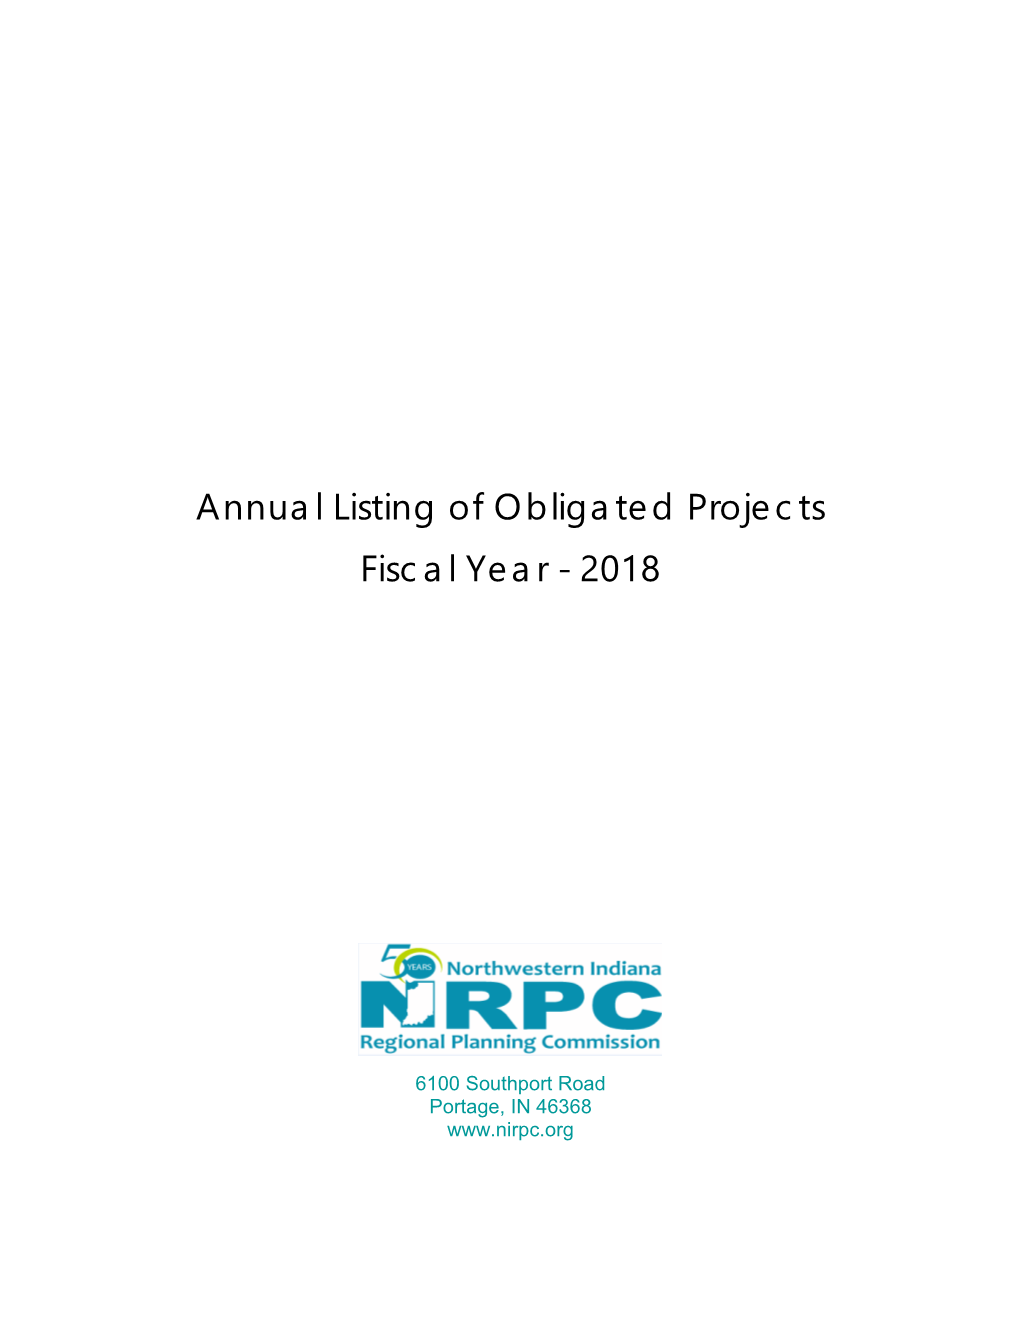 Annual List of Obligated Projects